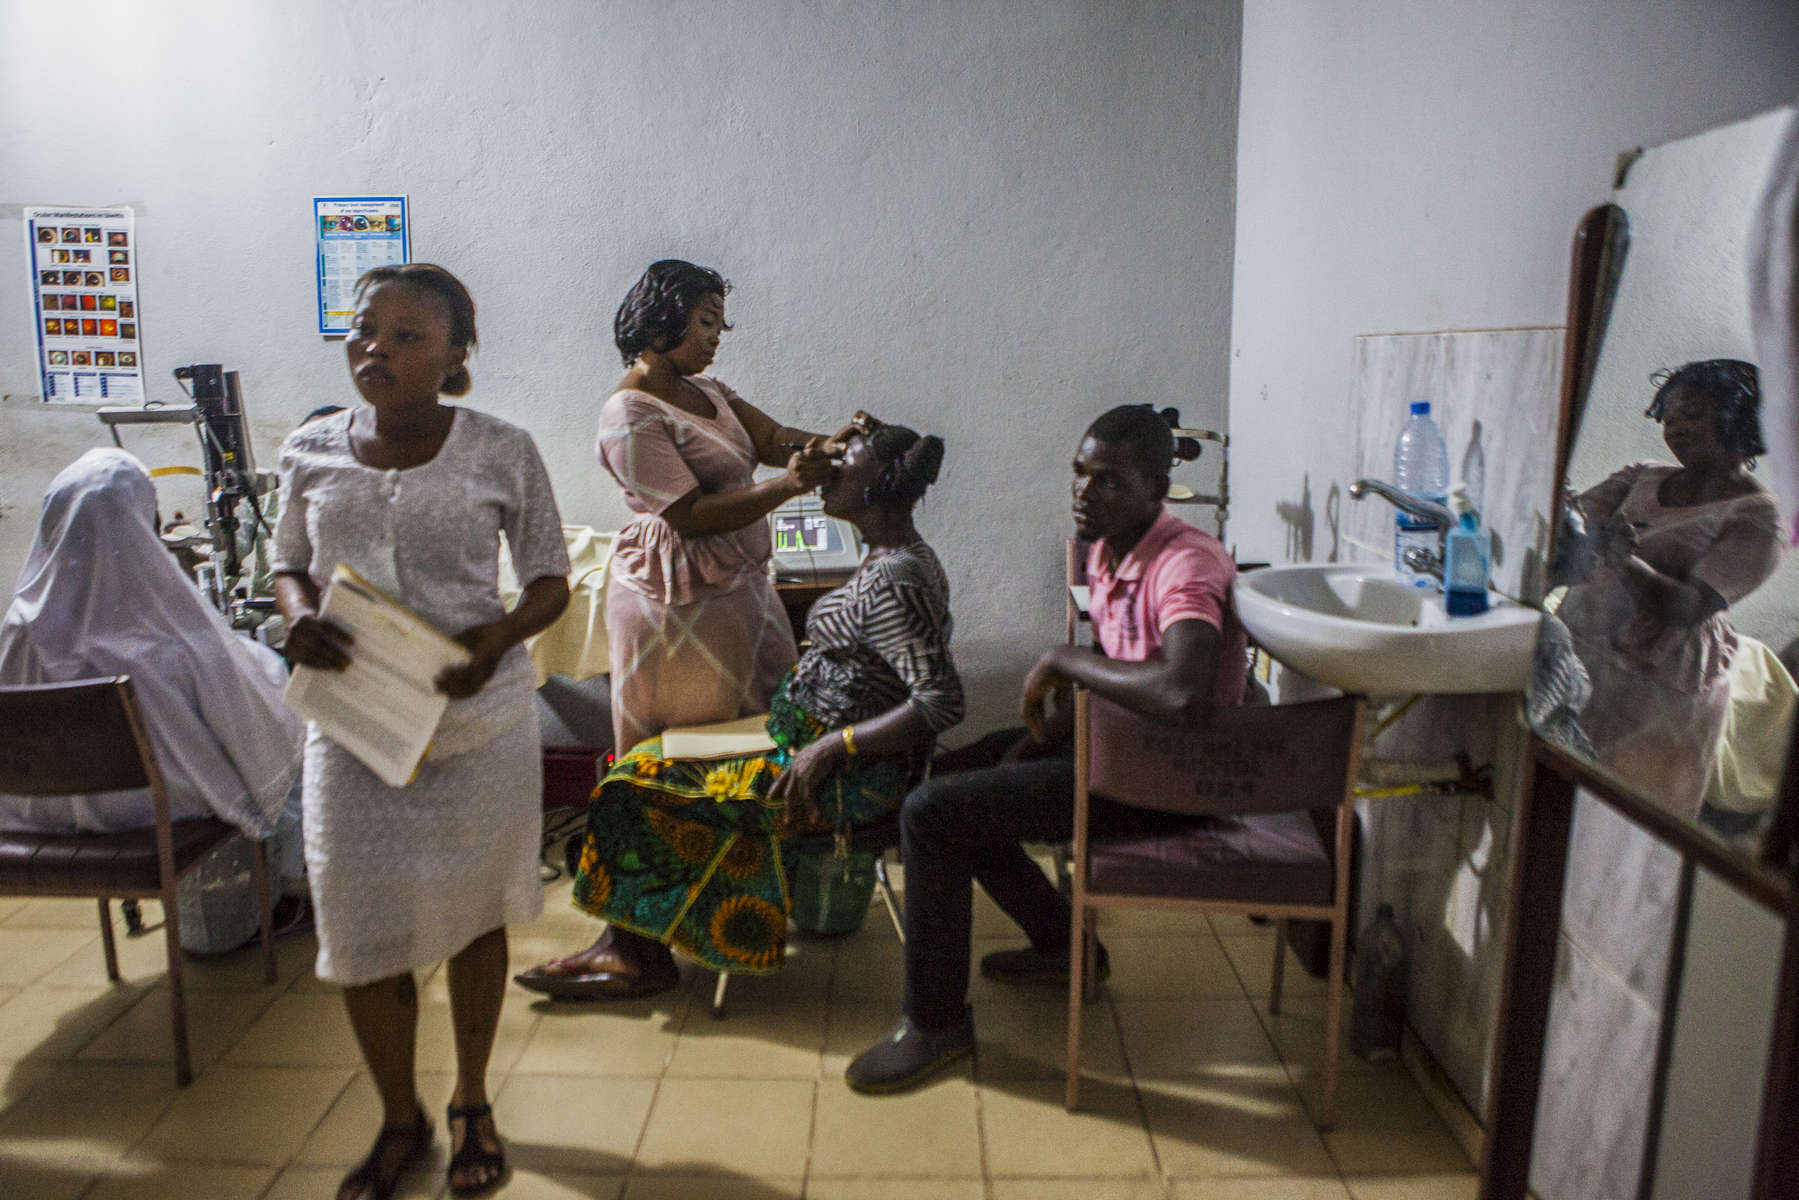 Ophthalmic nurse Hannah Dorwie, 32, (center) measures the curvature of the eye of an Ebola survivor at the Kissy United Methodist Church Eye Hospital in Freetown, Sierra Leone. Long after recovering from the largest Ebola outbreaks in history, survivors continue to experience debilitating complications including uvetis, an inflammation of the eye, leading to severe cataracts leaving the survivor with little to no sight in the affected eye. Doctors from Emory University Hospital have traveled to Sierra Leone to restore the sight of survivors suffering from severe cataracts in an effort to help them return to a more normal life. 